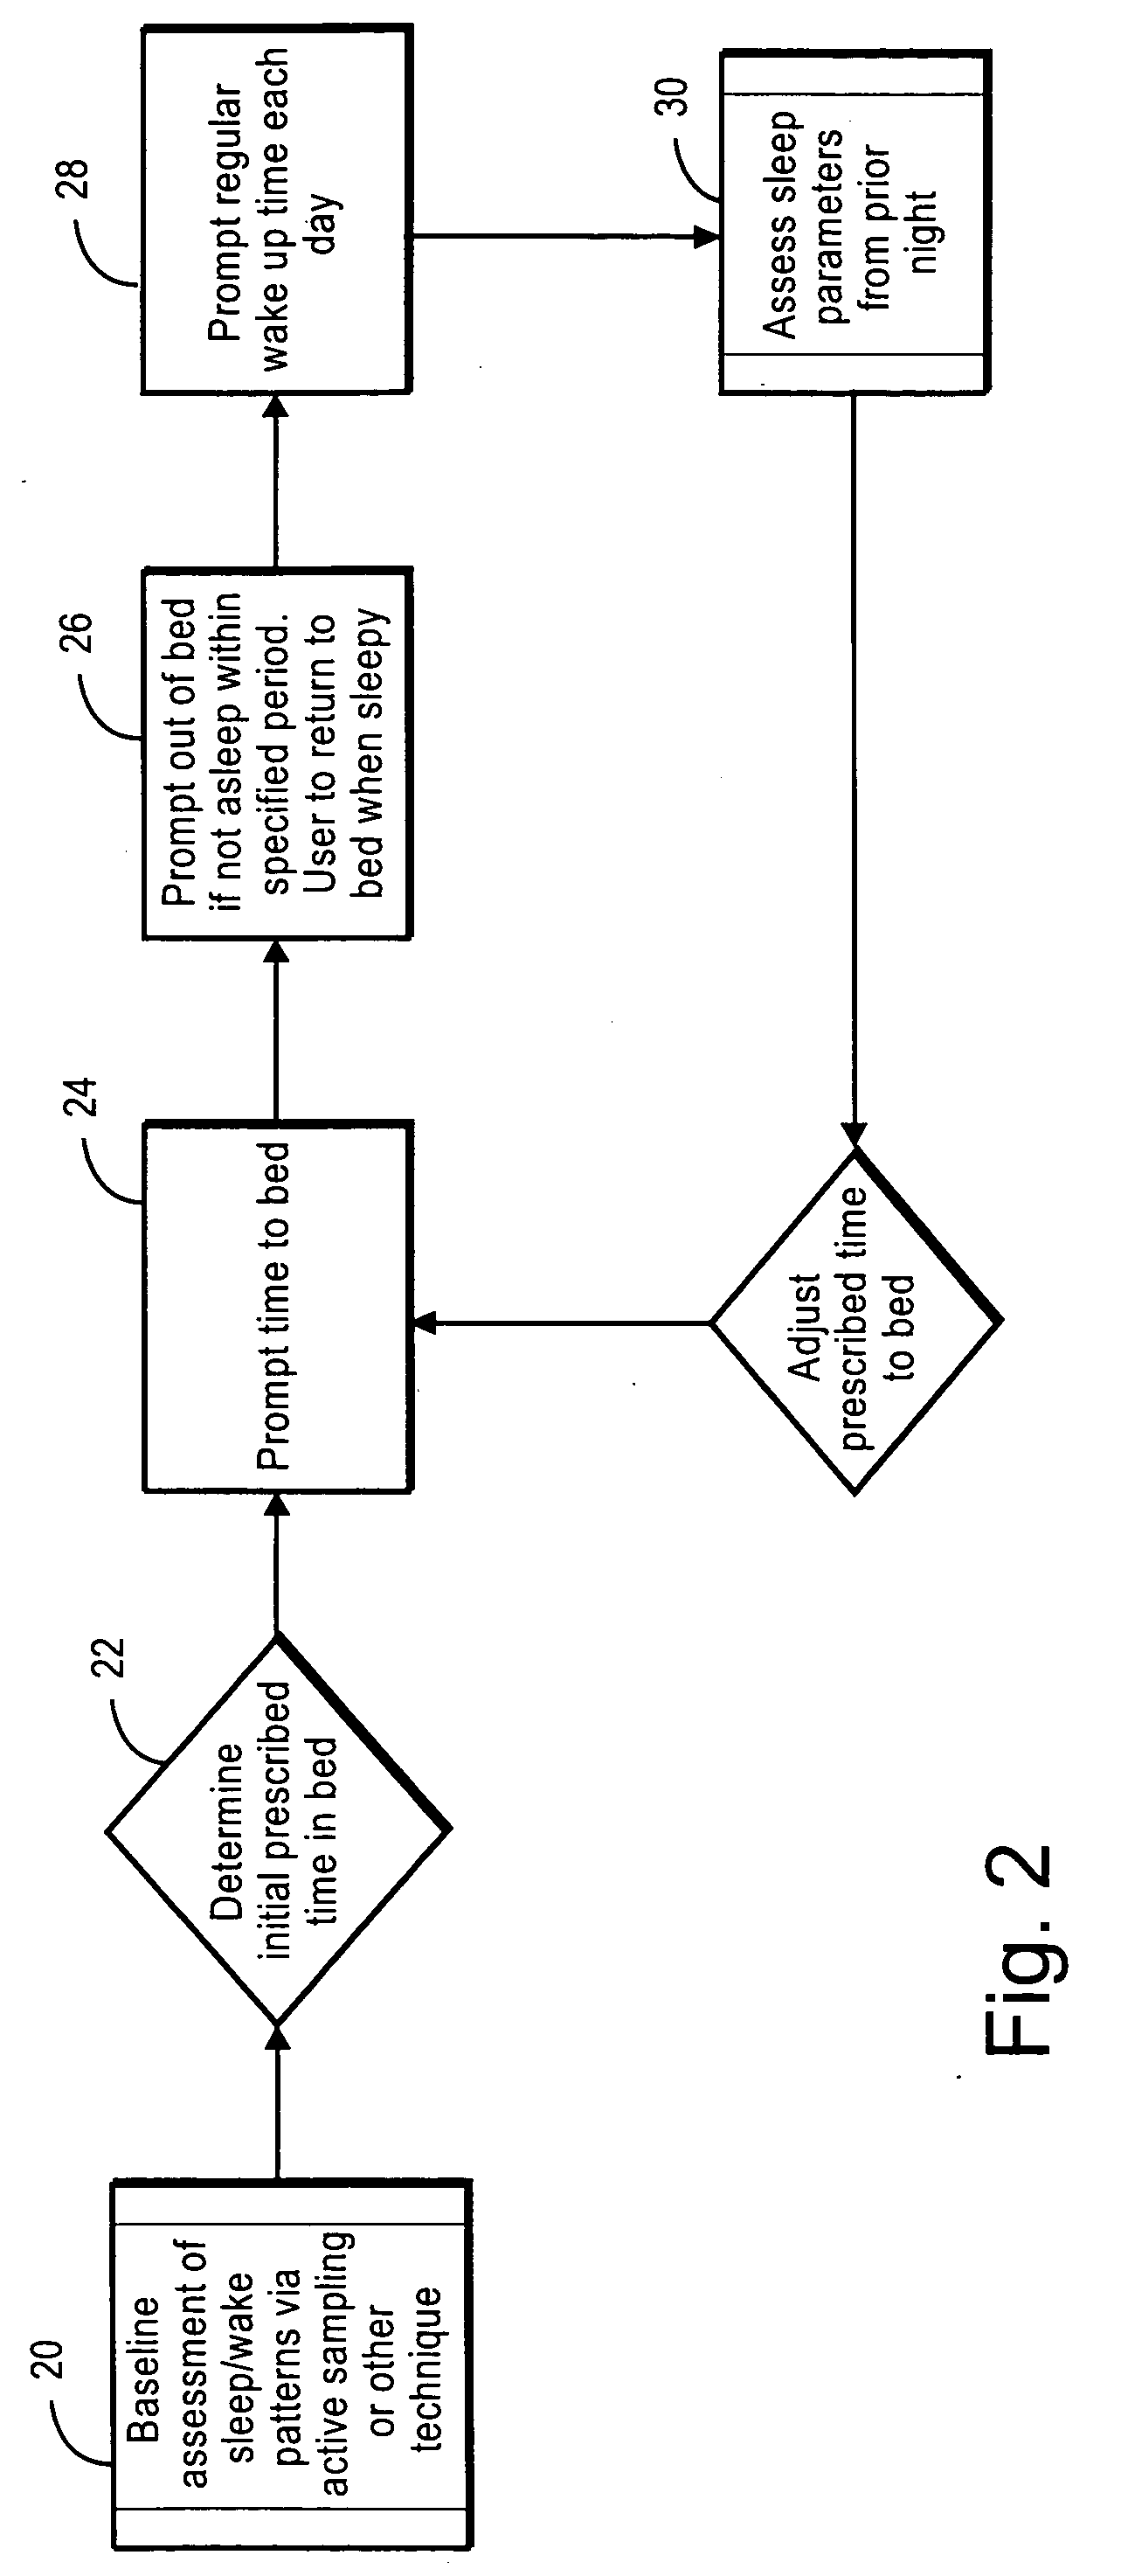 Insomnia assessment and treatment device and method